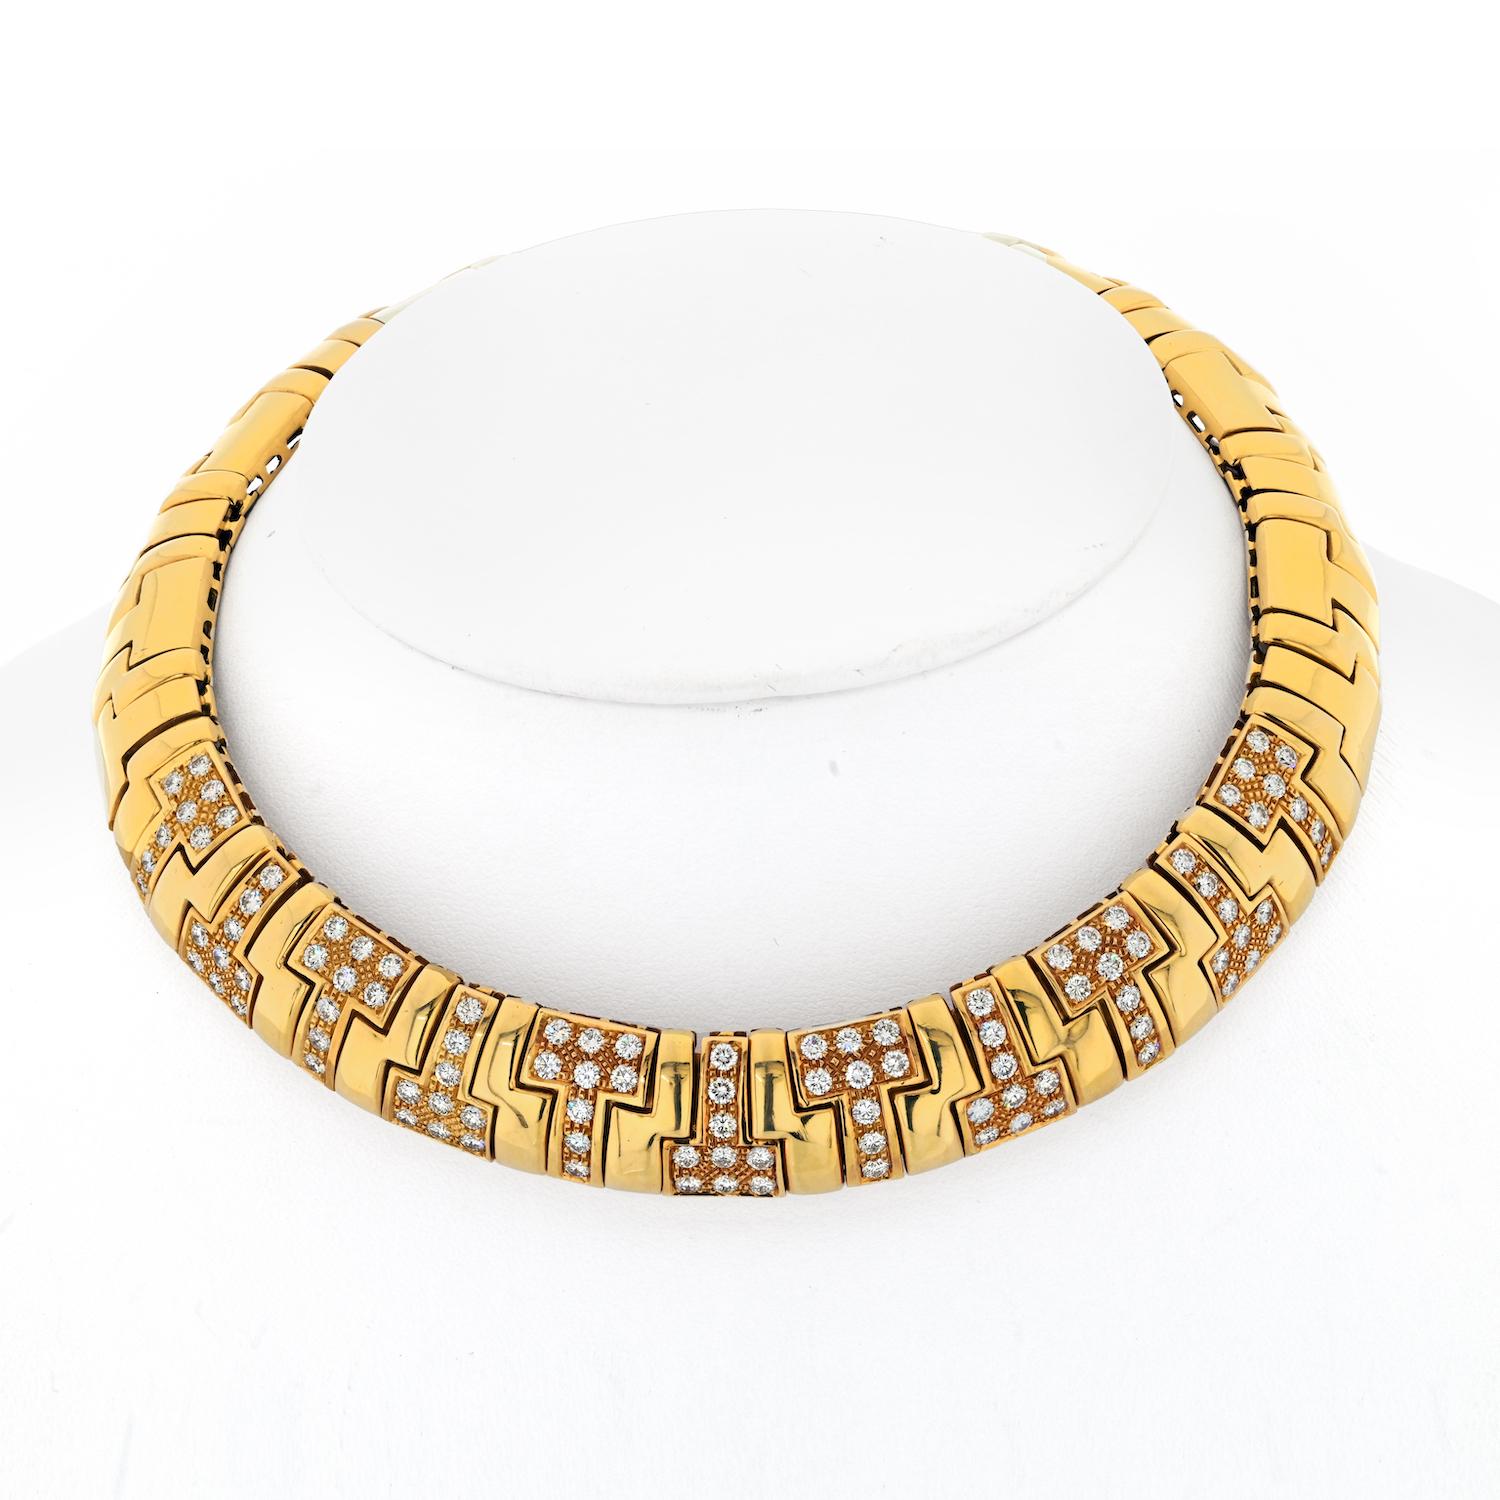 Elevate your jewelry collection with this breathtaking Tiffany & Co. 18-karat yellow gold 'T-True' choker necklace. A masterpiece of design and craftsmanship, this exquisite piece is adorned with an array of ninety-nine round brilliant cut diamonds.